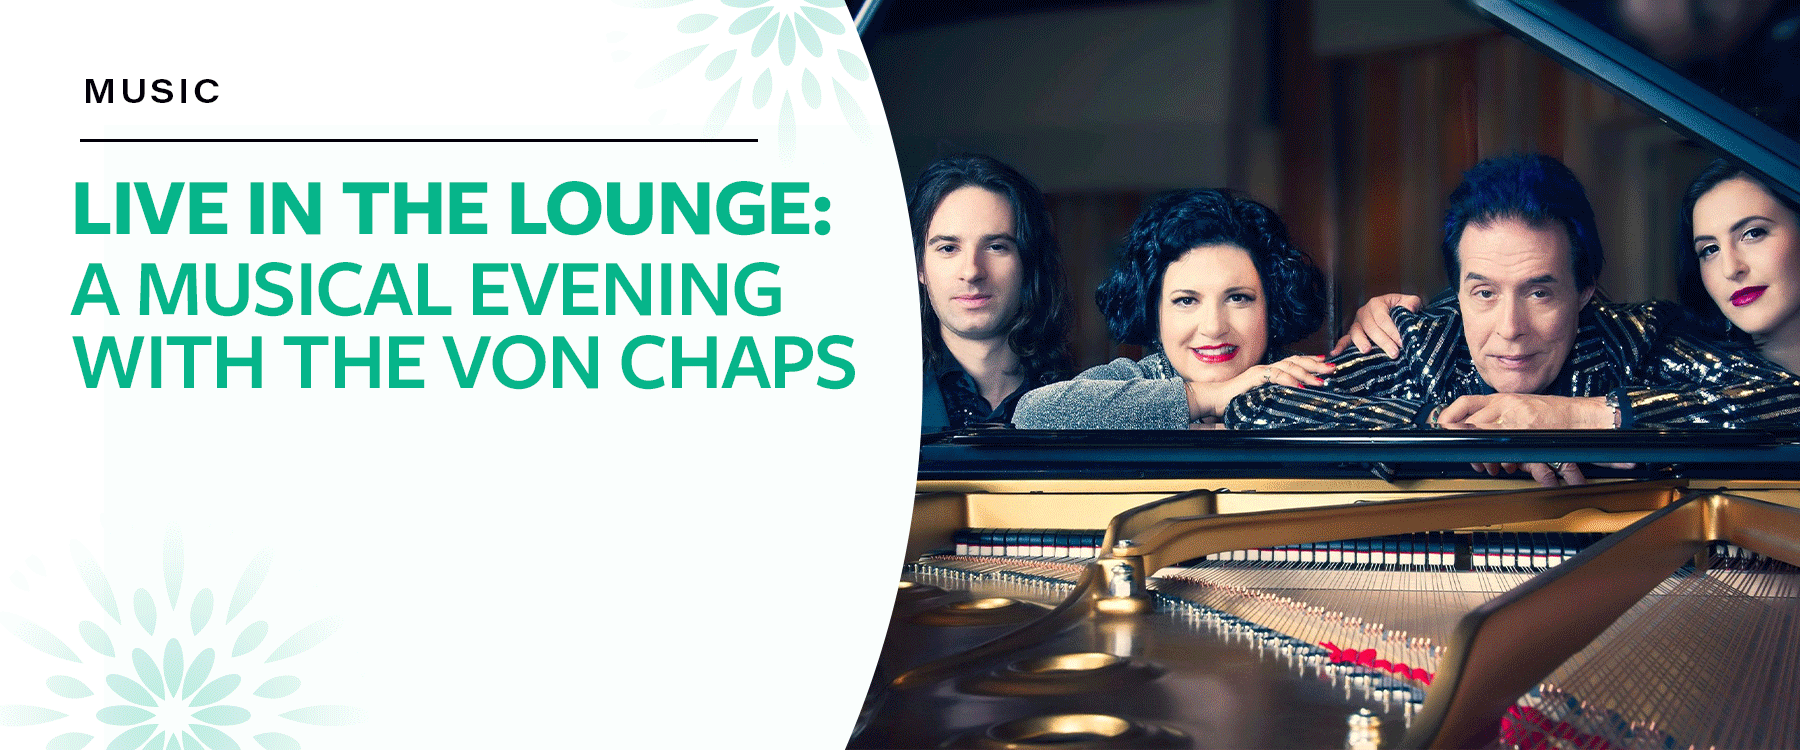 Music Live in the Lounge: A Musical Evening with The Von Chaps